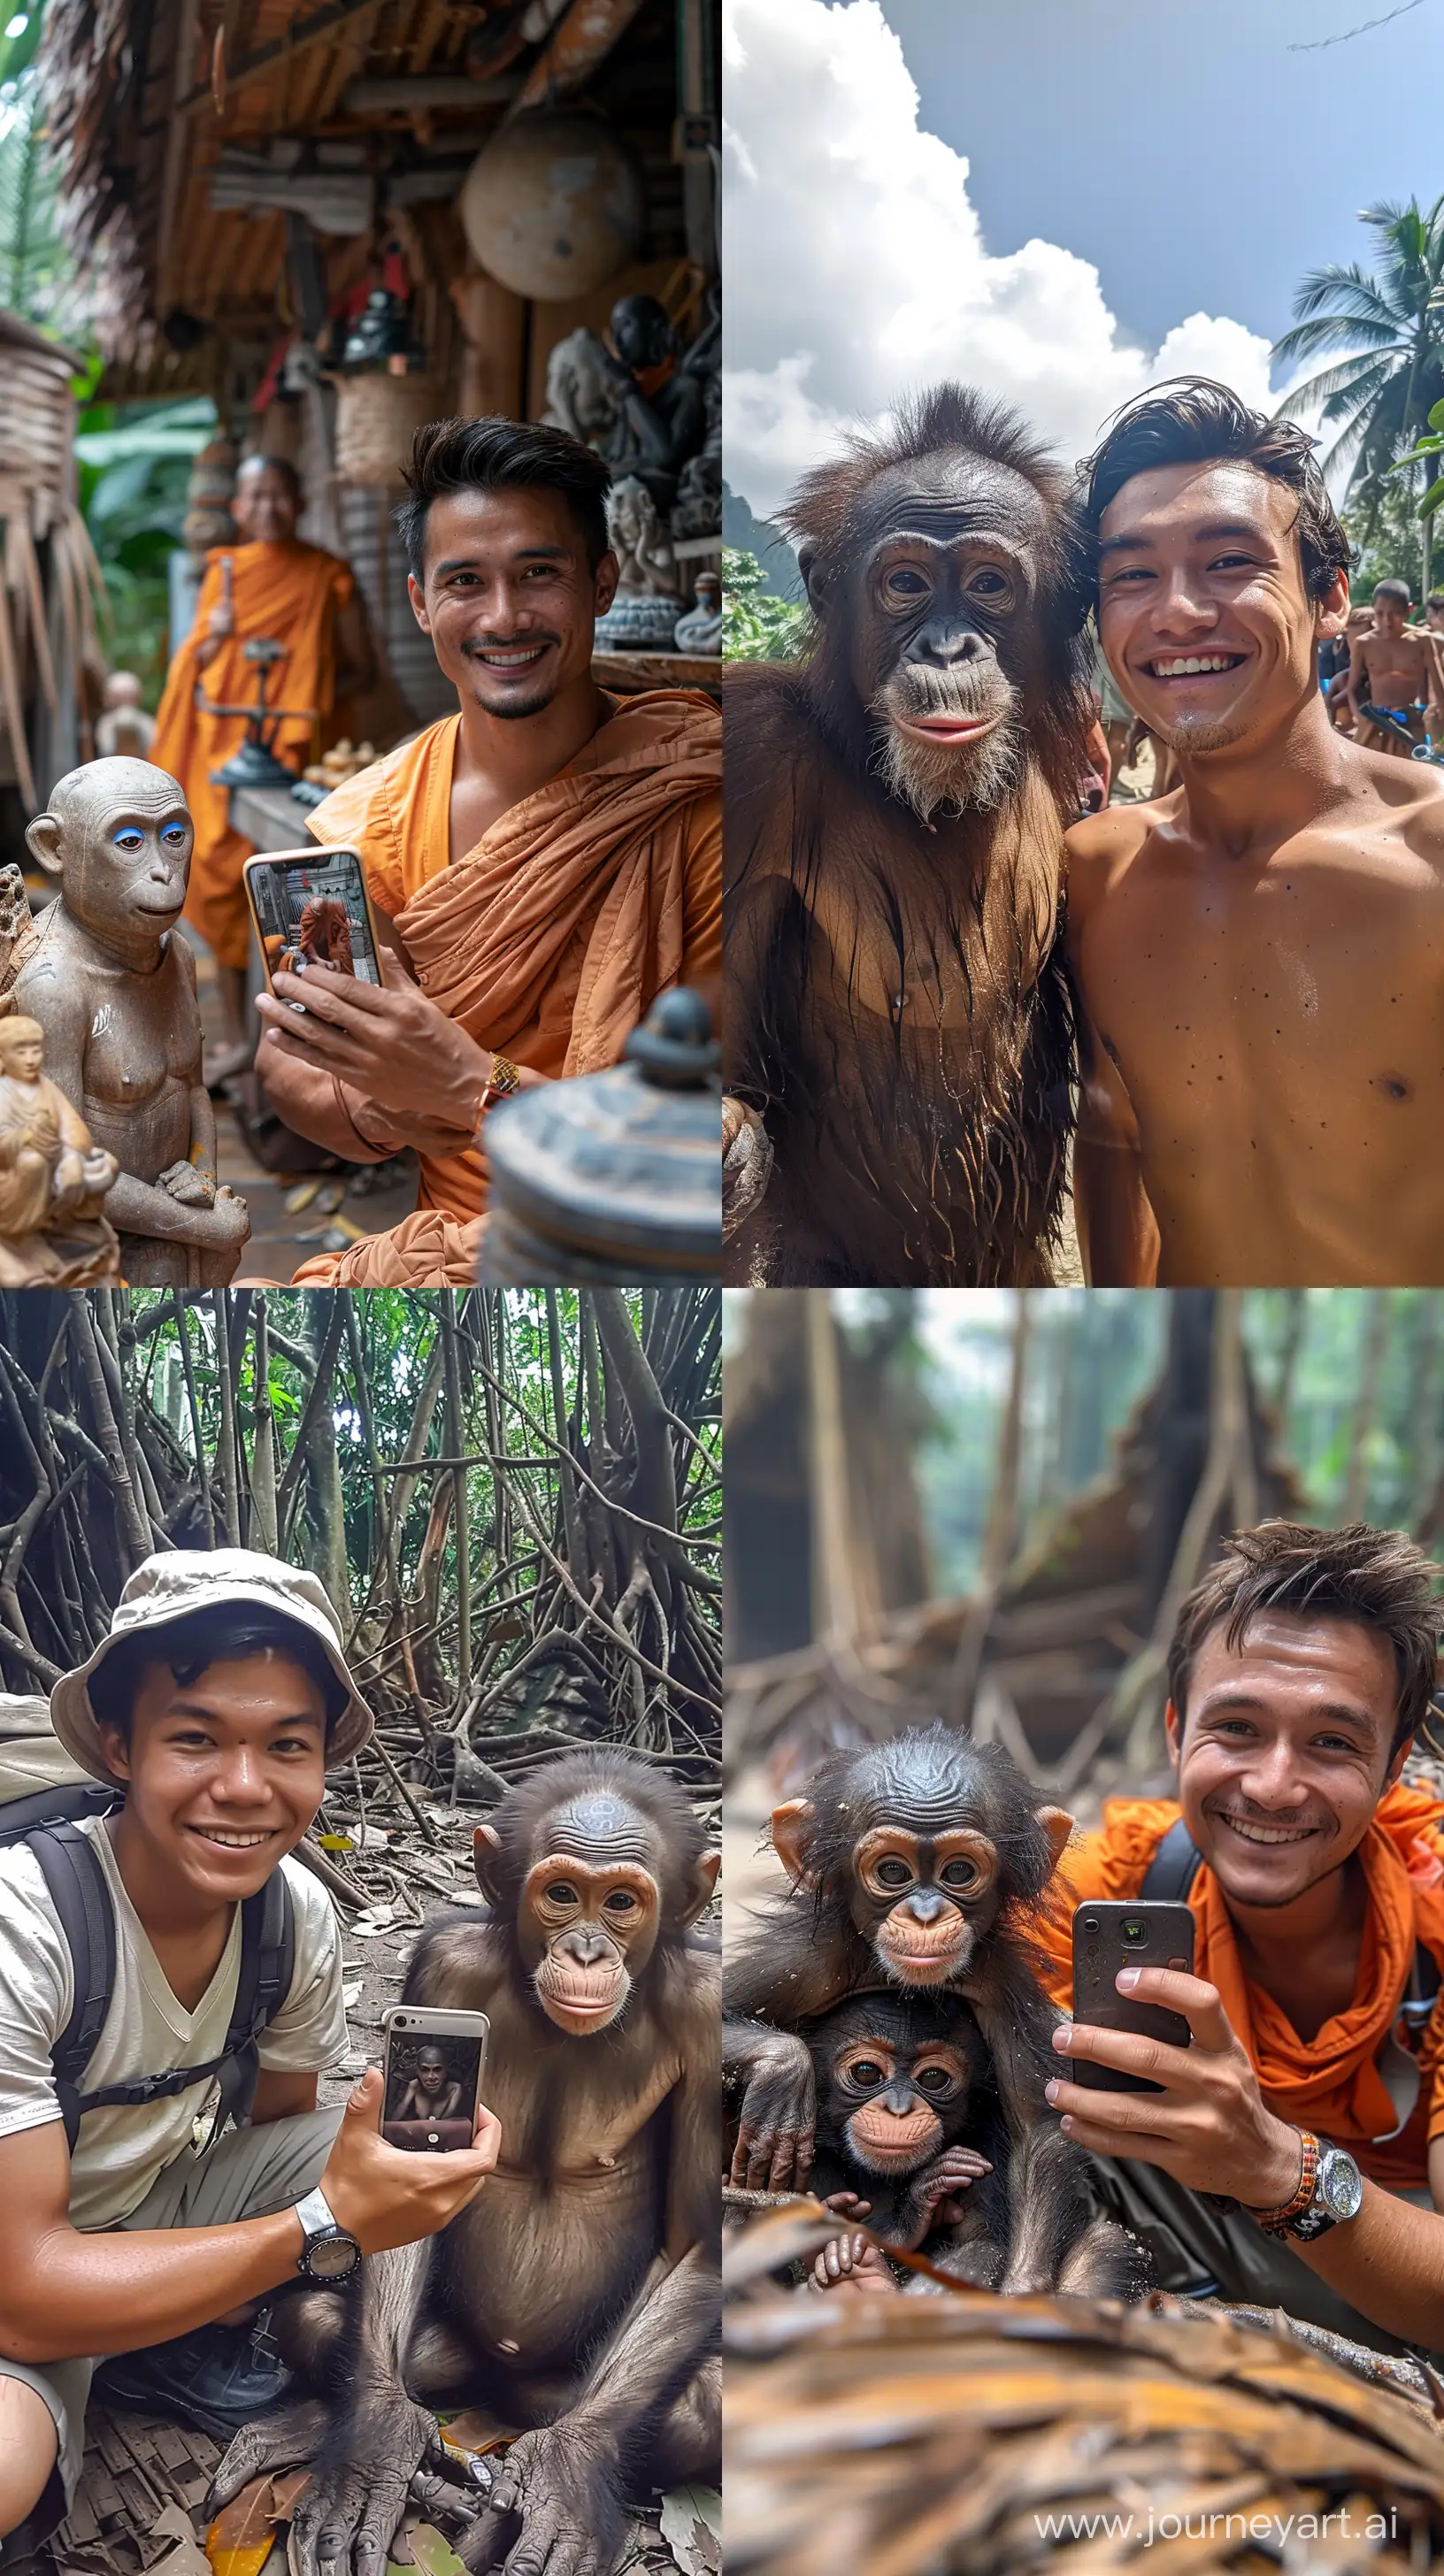 Man-Taking-Selfie-with-Monkey-in-Thailand-Snapchat-Moment